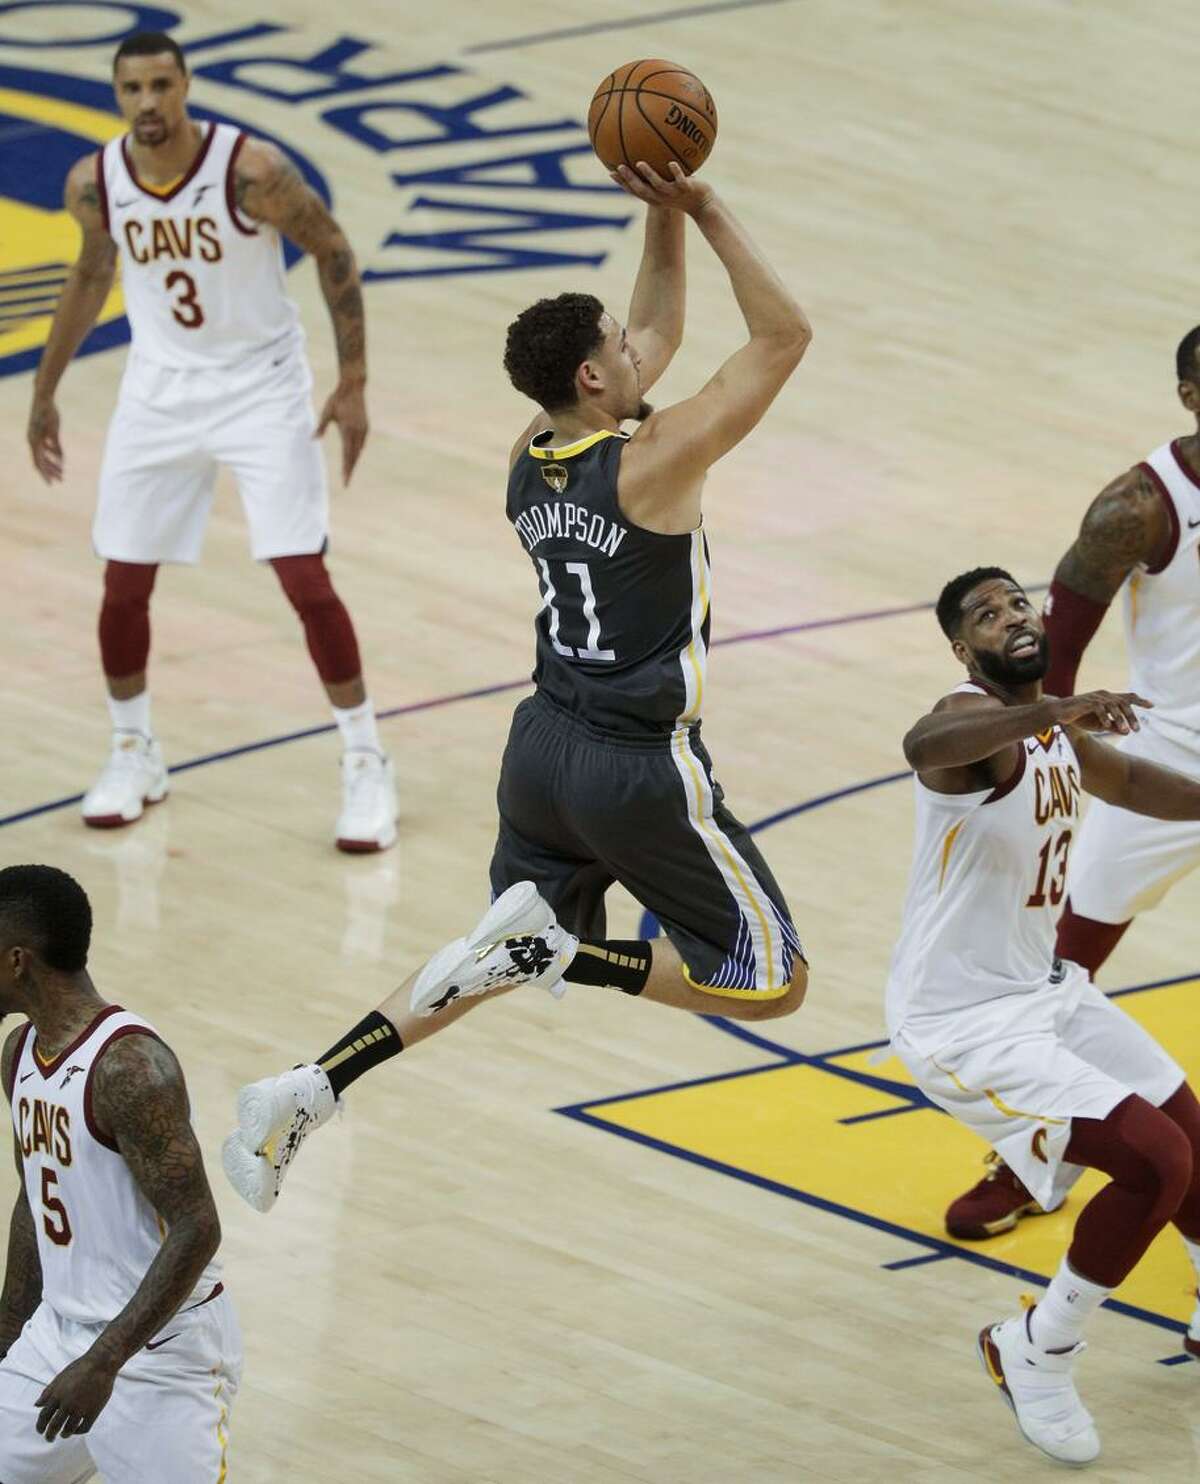 Warriors guard Klay Thompson does not look like a man with a high ankle sprain as he goes up for a shot over Cleveland Cavaliers center Tristan Thompson in the first quarter of Game 2 of the NBA Finals at Oracle Arena.